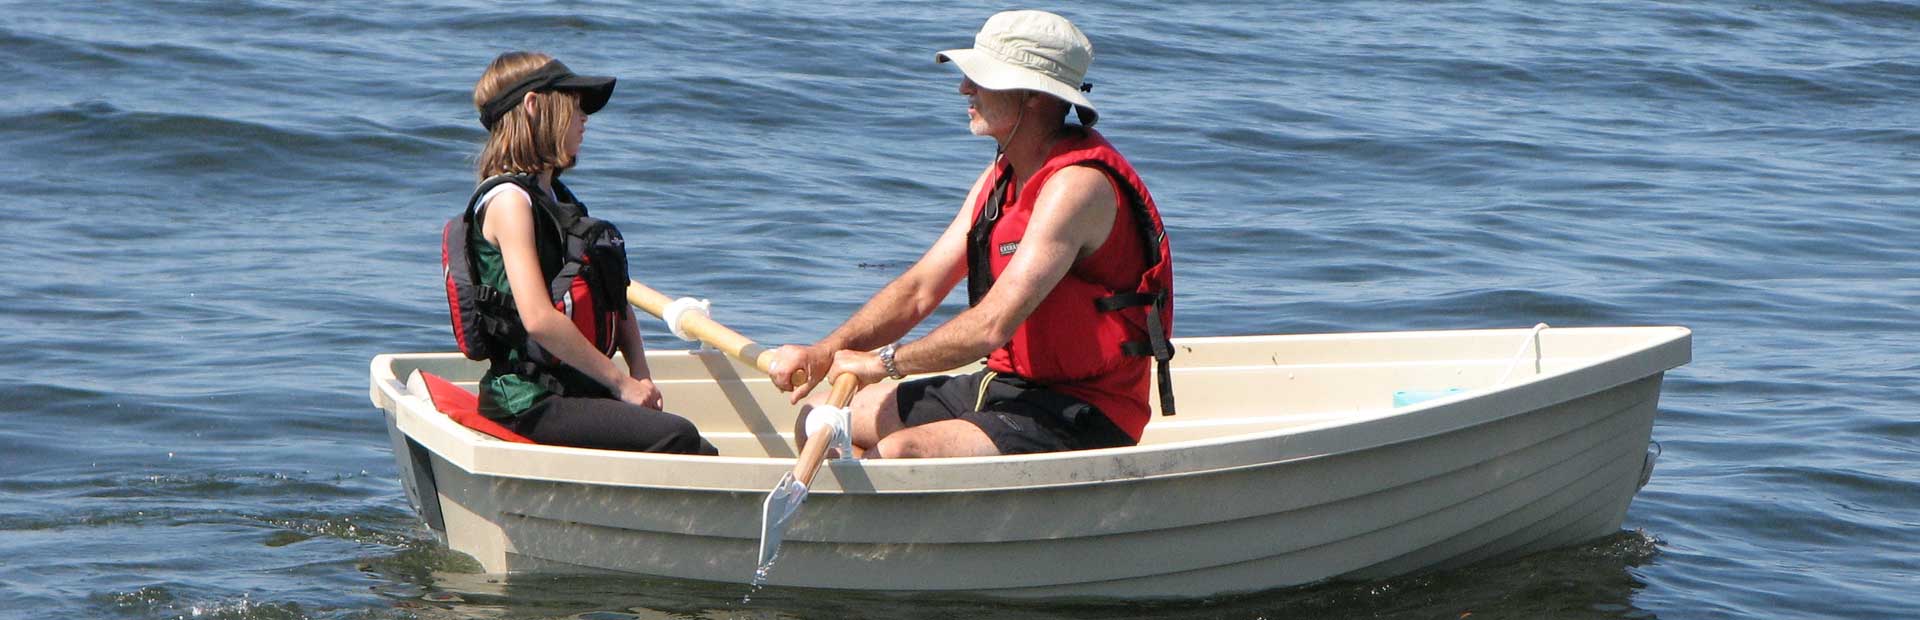 Father and daughter in small rowboat on a lake as Father rows.